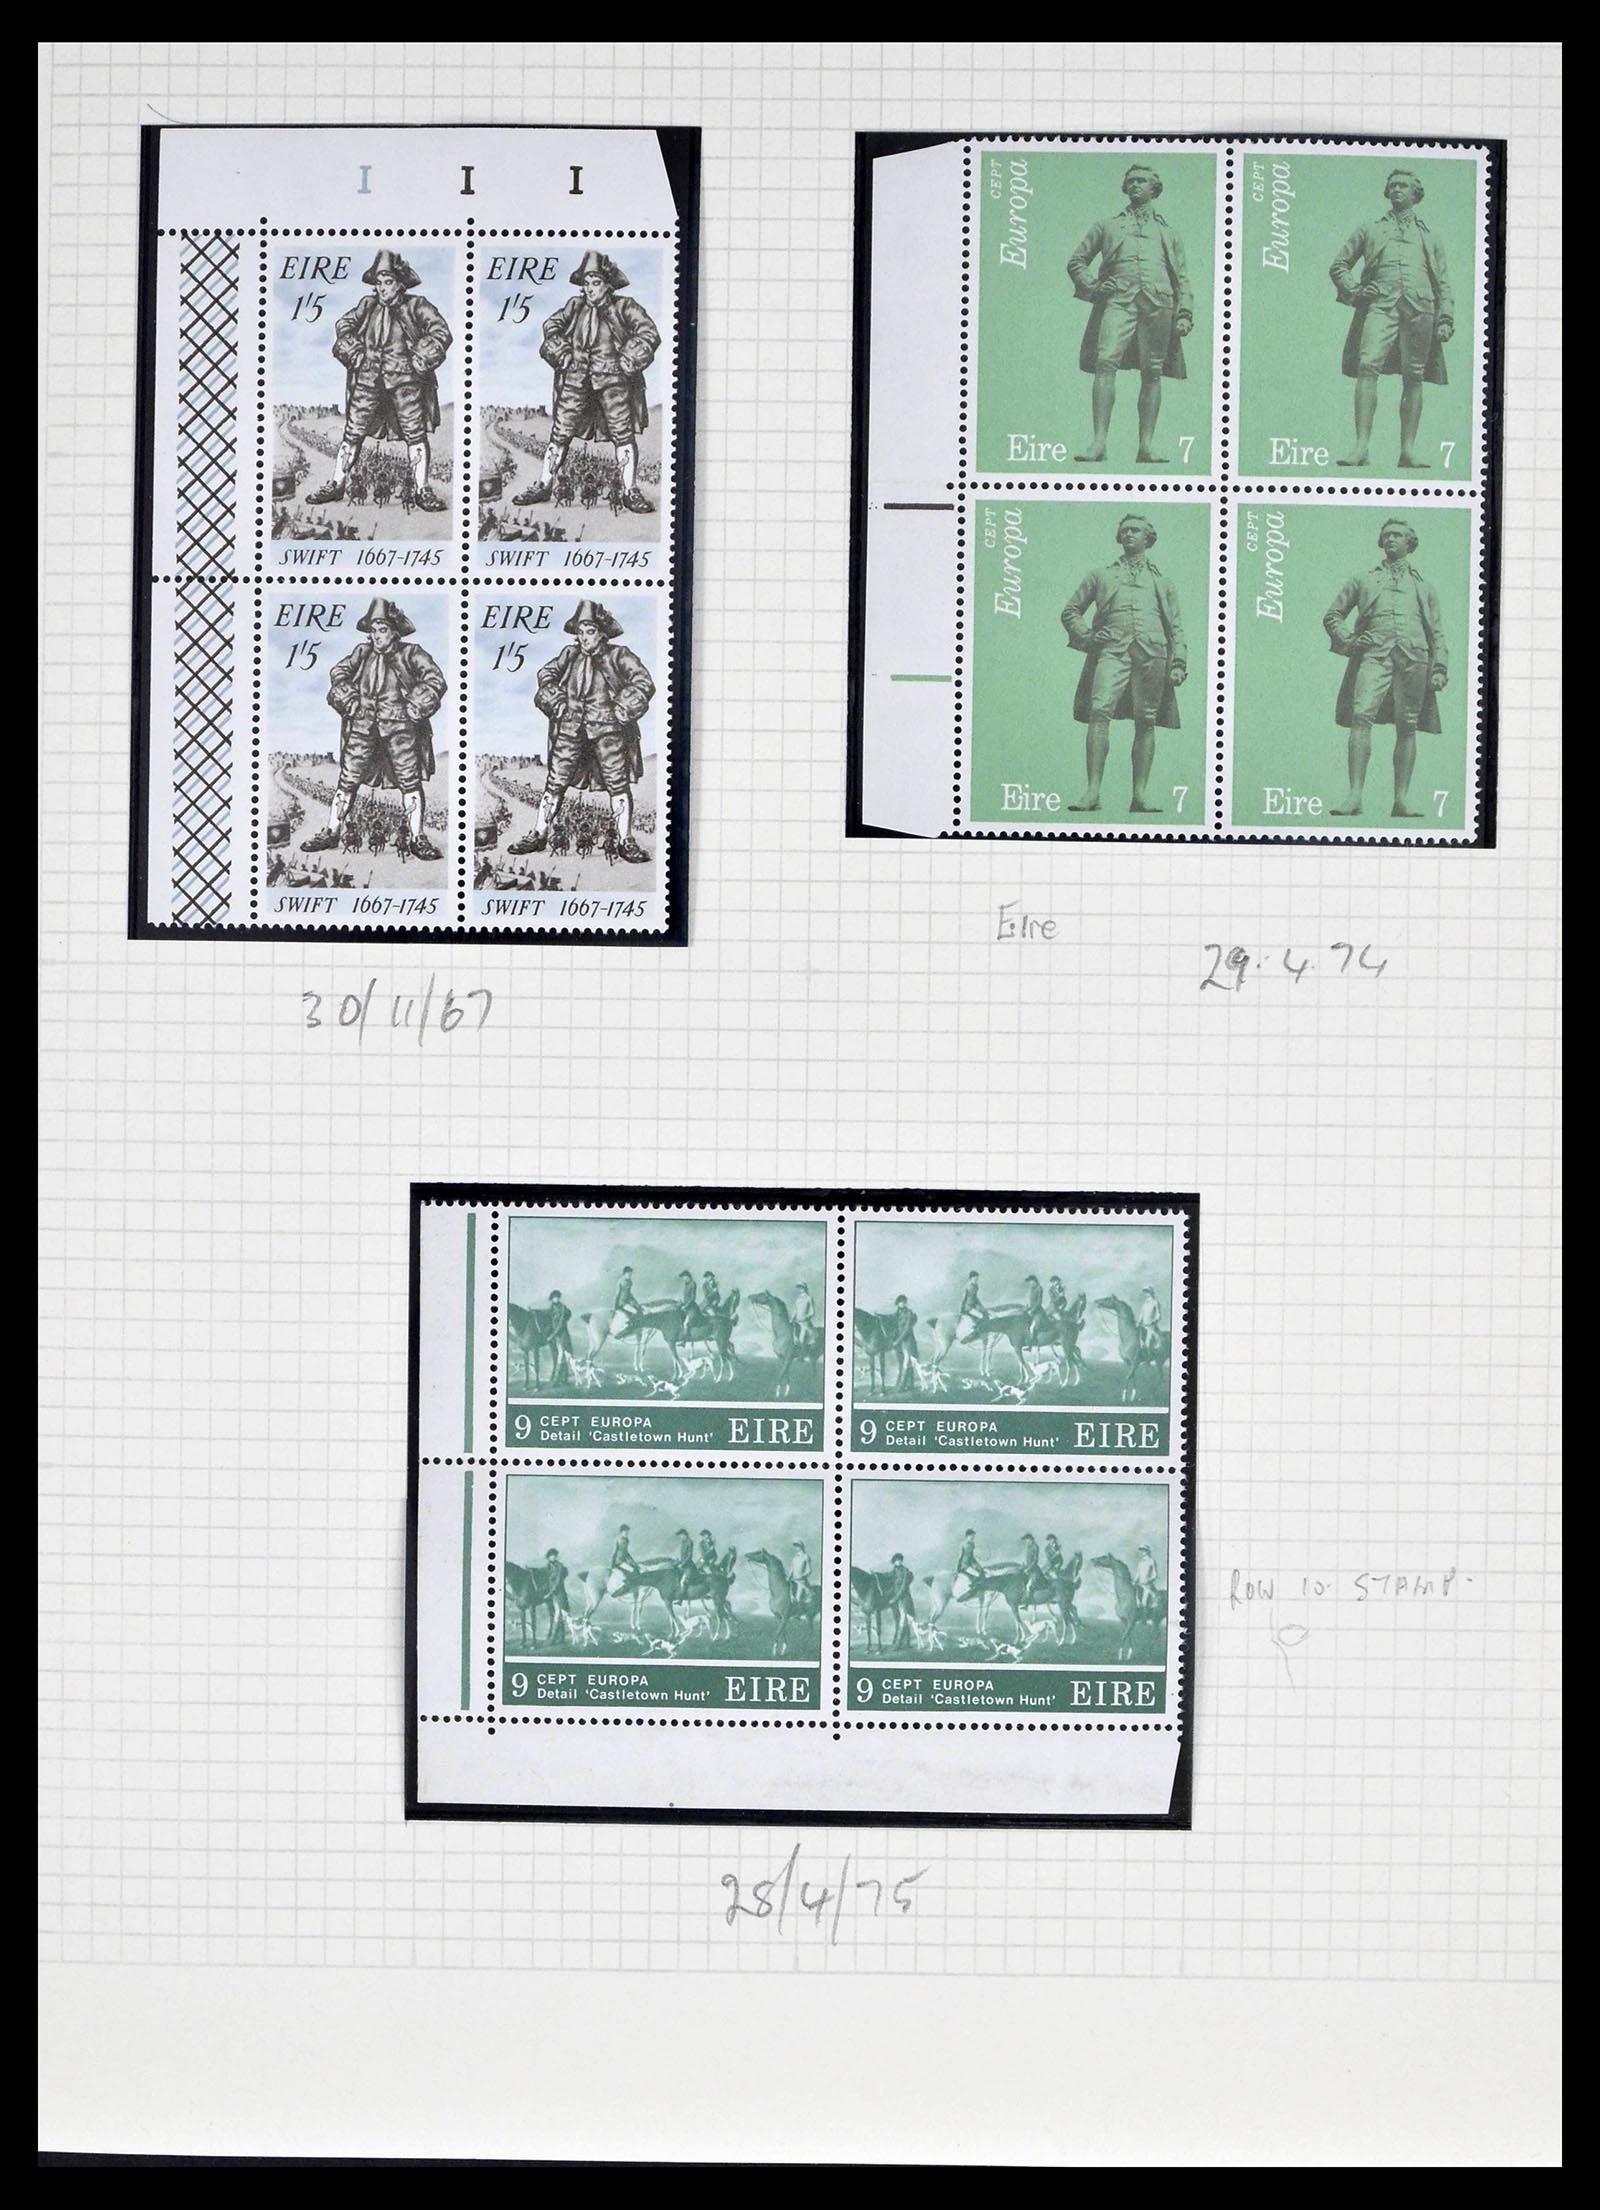 39272 0006 - Stamp collection 39272 Ireland plateflaws and varities 1963-1981.